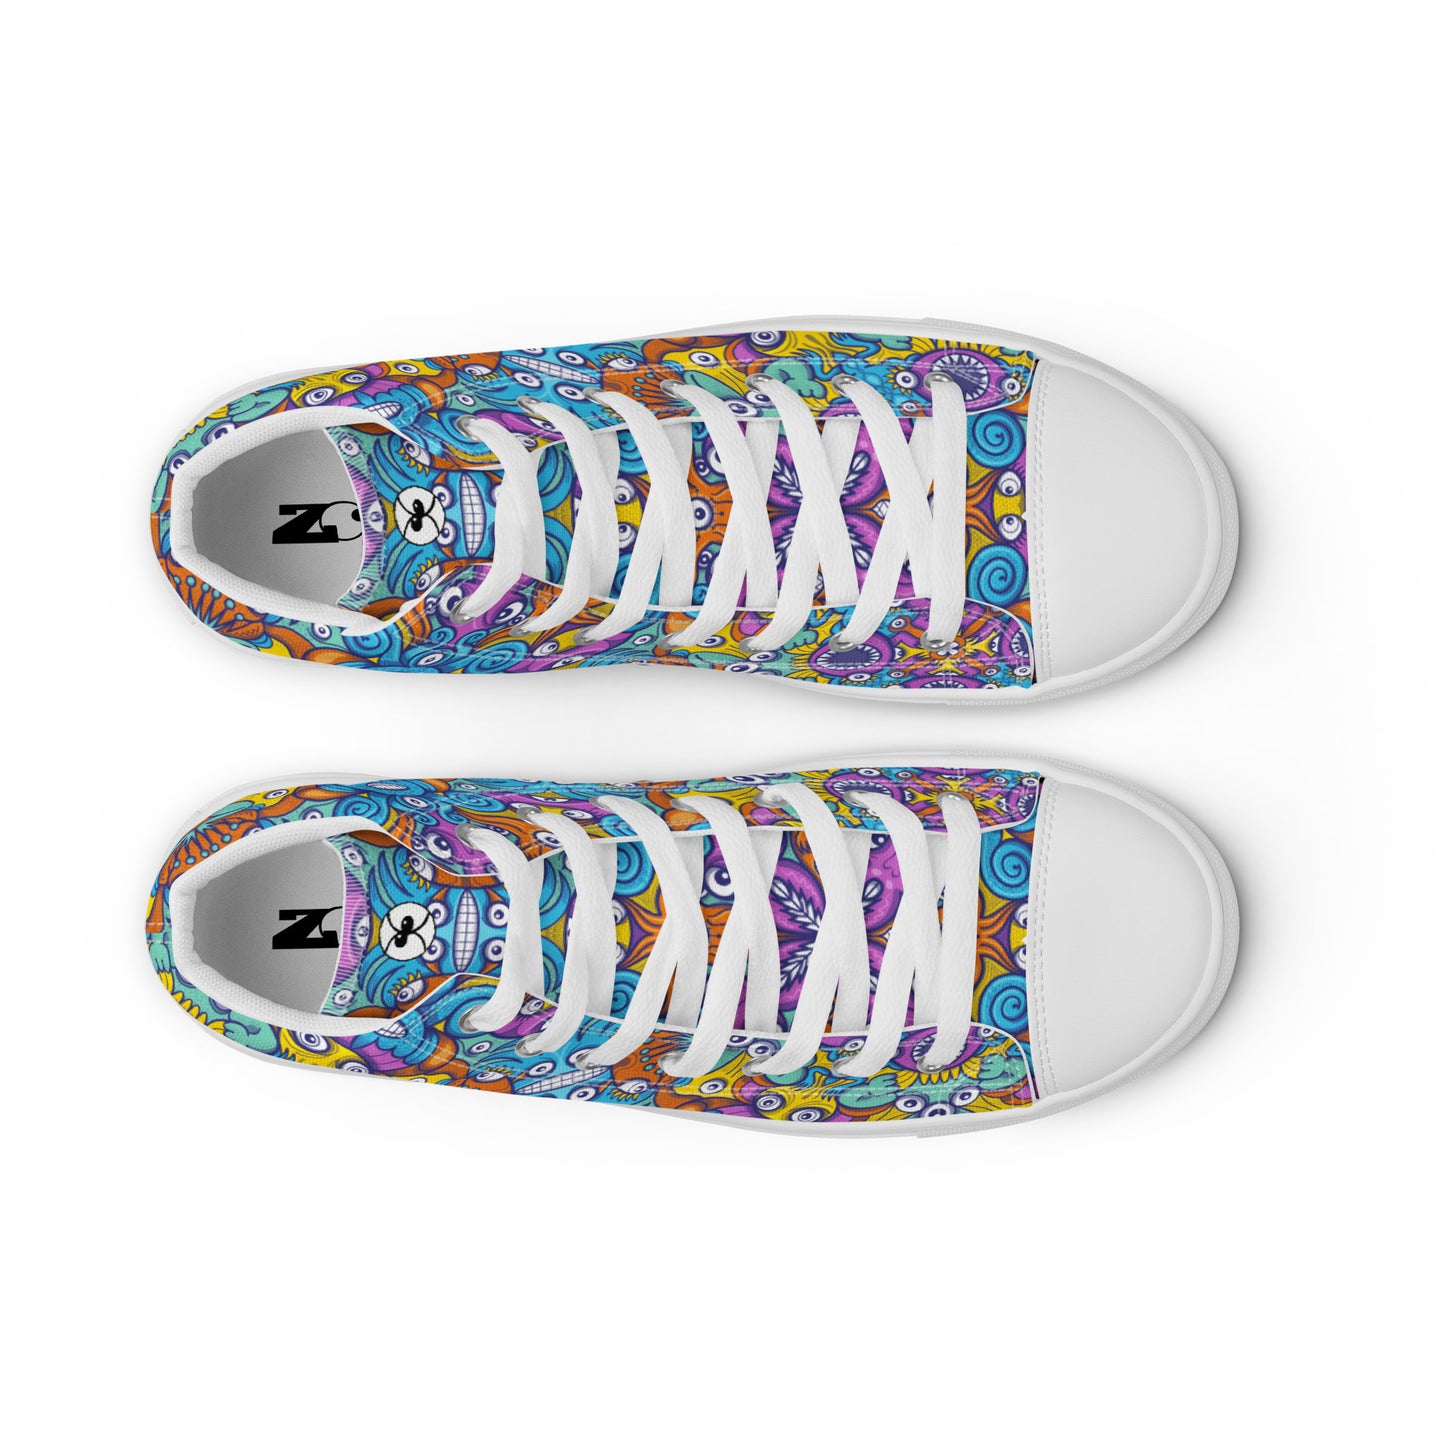 The ultimate sea beasts cast from the deep end of the ocean Men’s high top canvas shoes. Top view